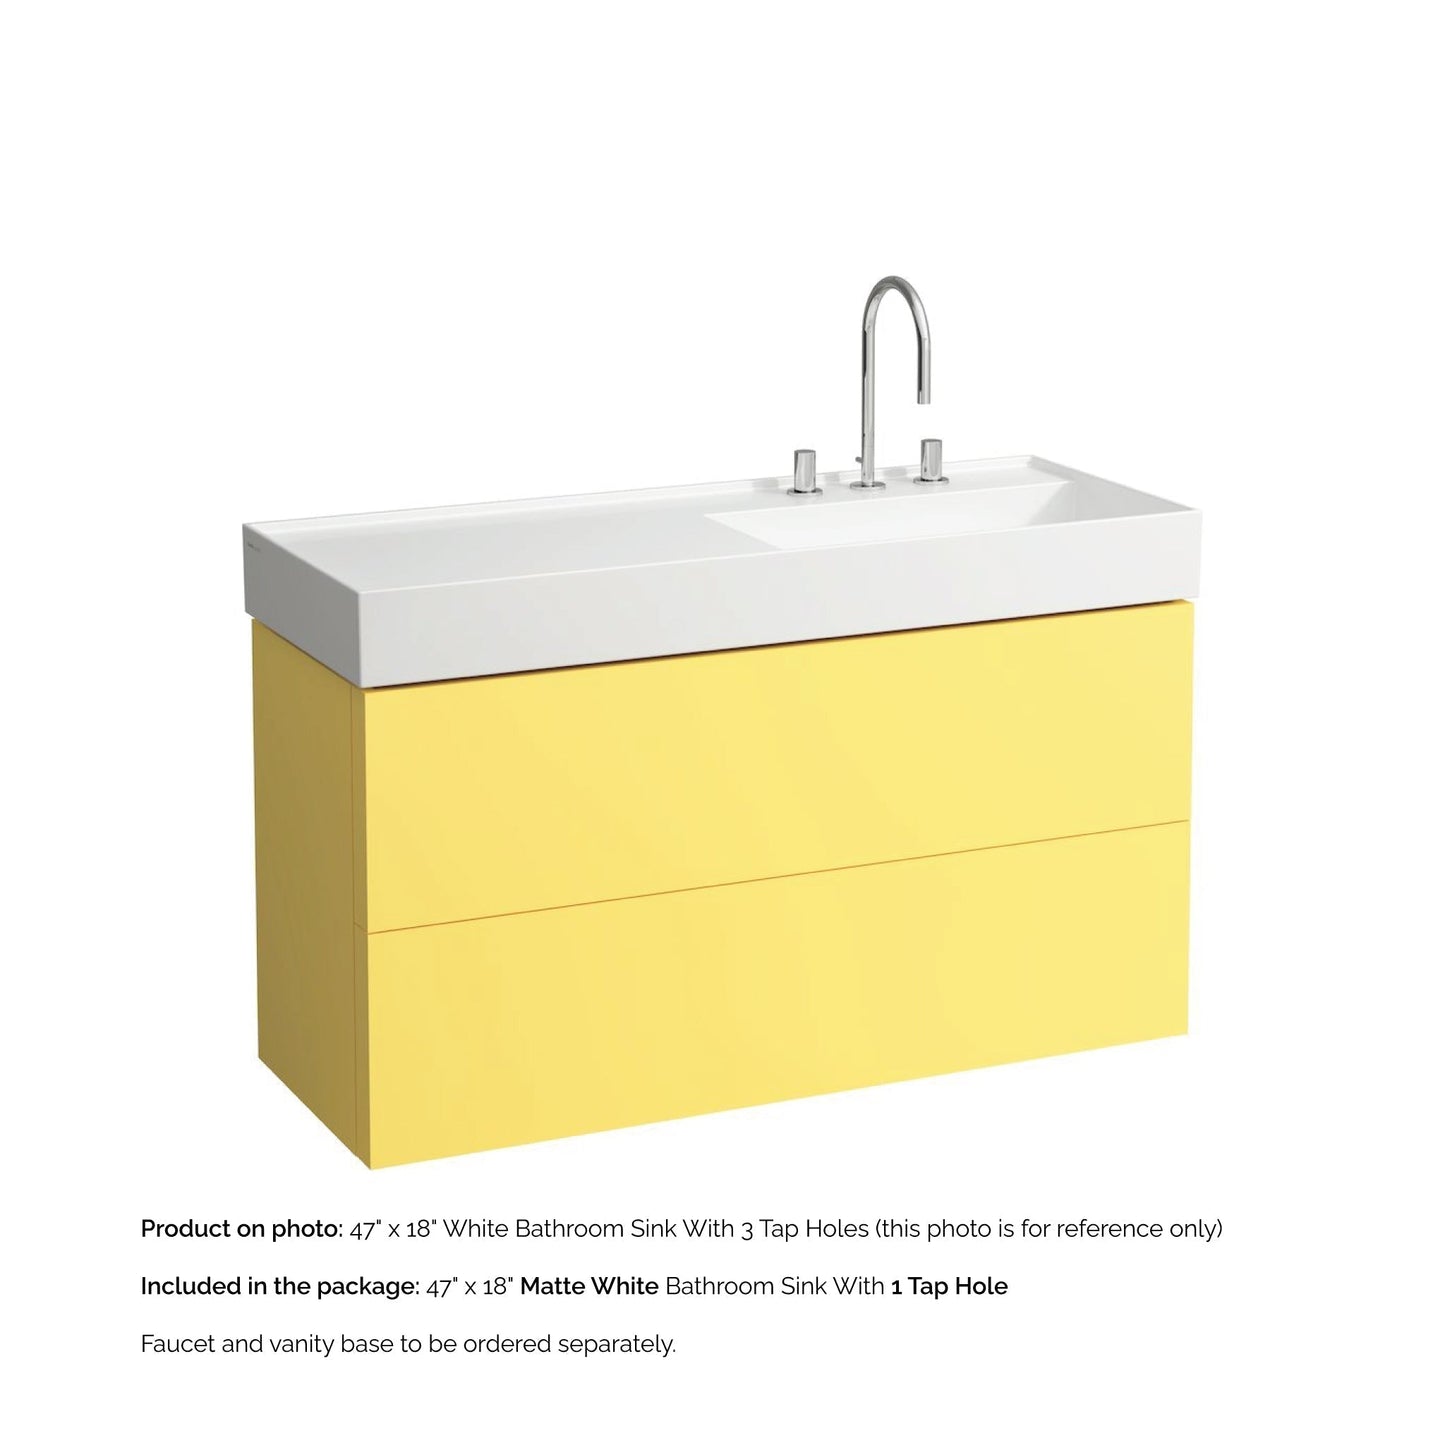 Laufen Kartell 47" x 18" Matte White Wall-Mounted Shelf-Left Bathroom Sink With Faucet Hole